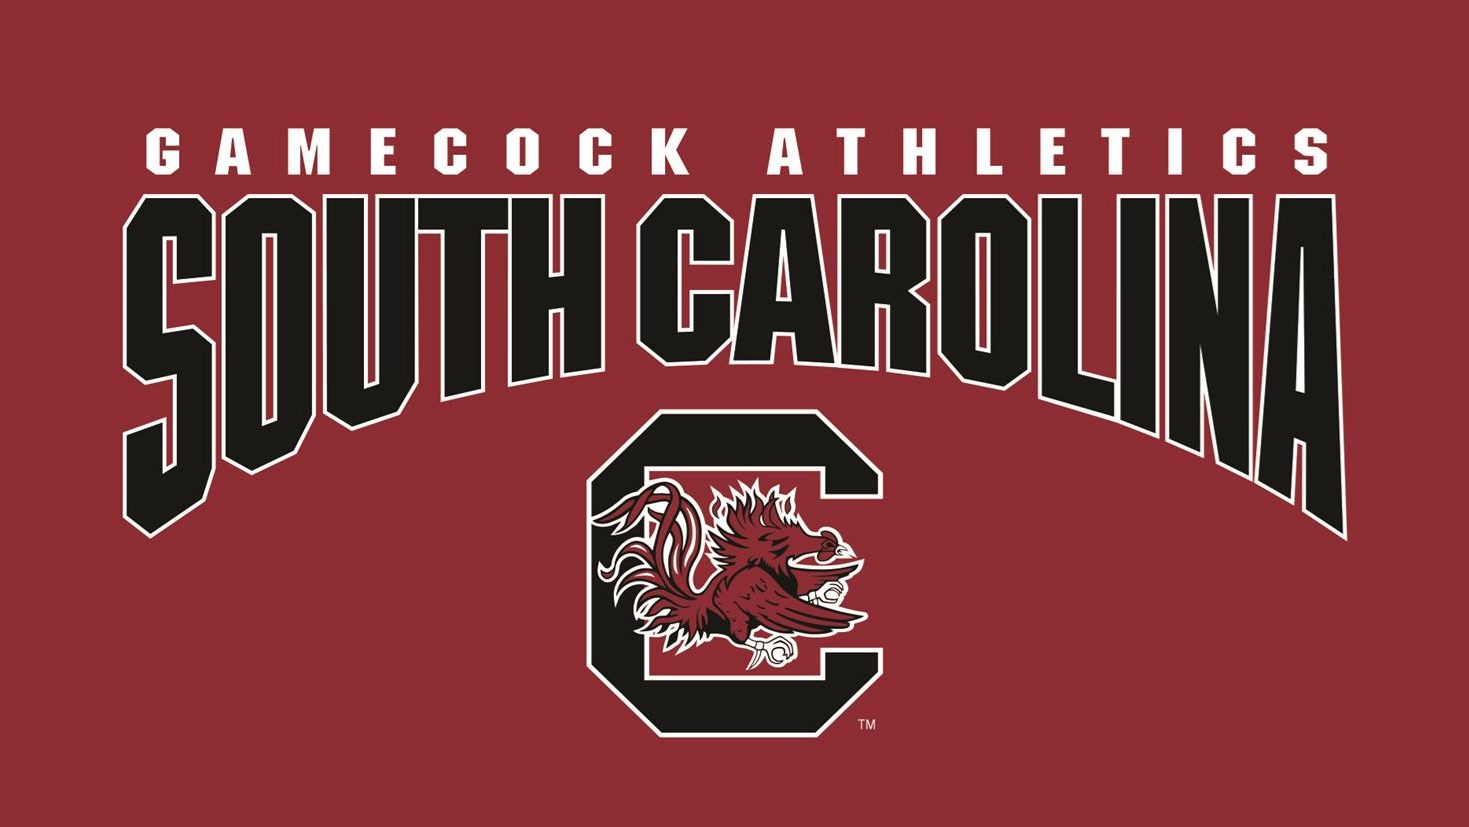 Preparing for Student-Athlete Return in Summer 2020 to the University of South Carolina